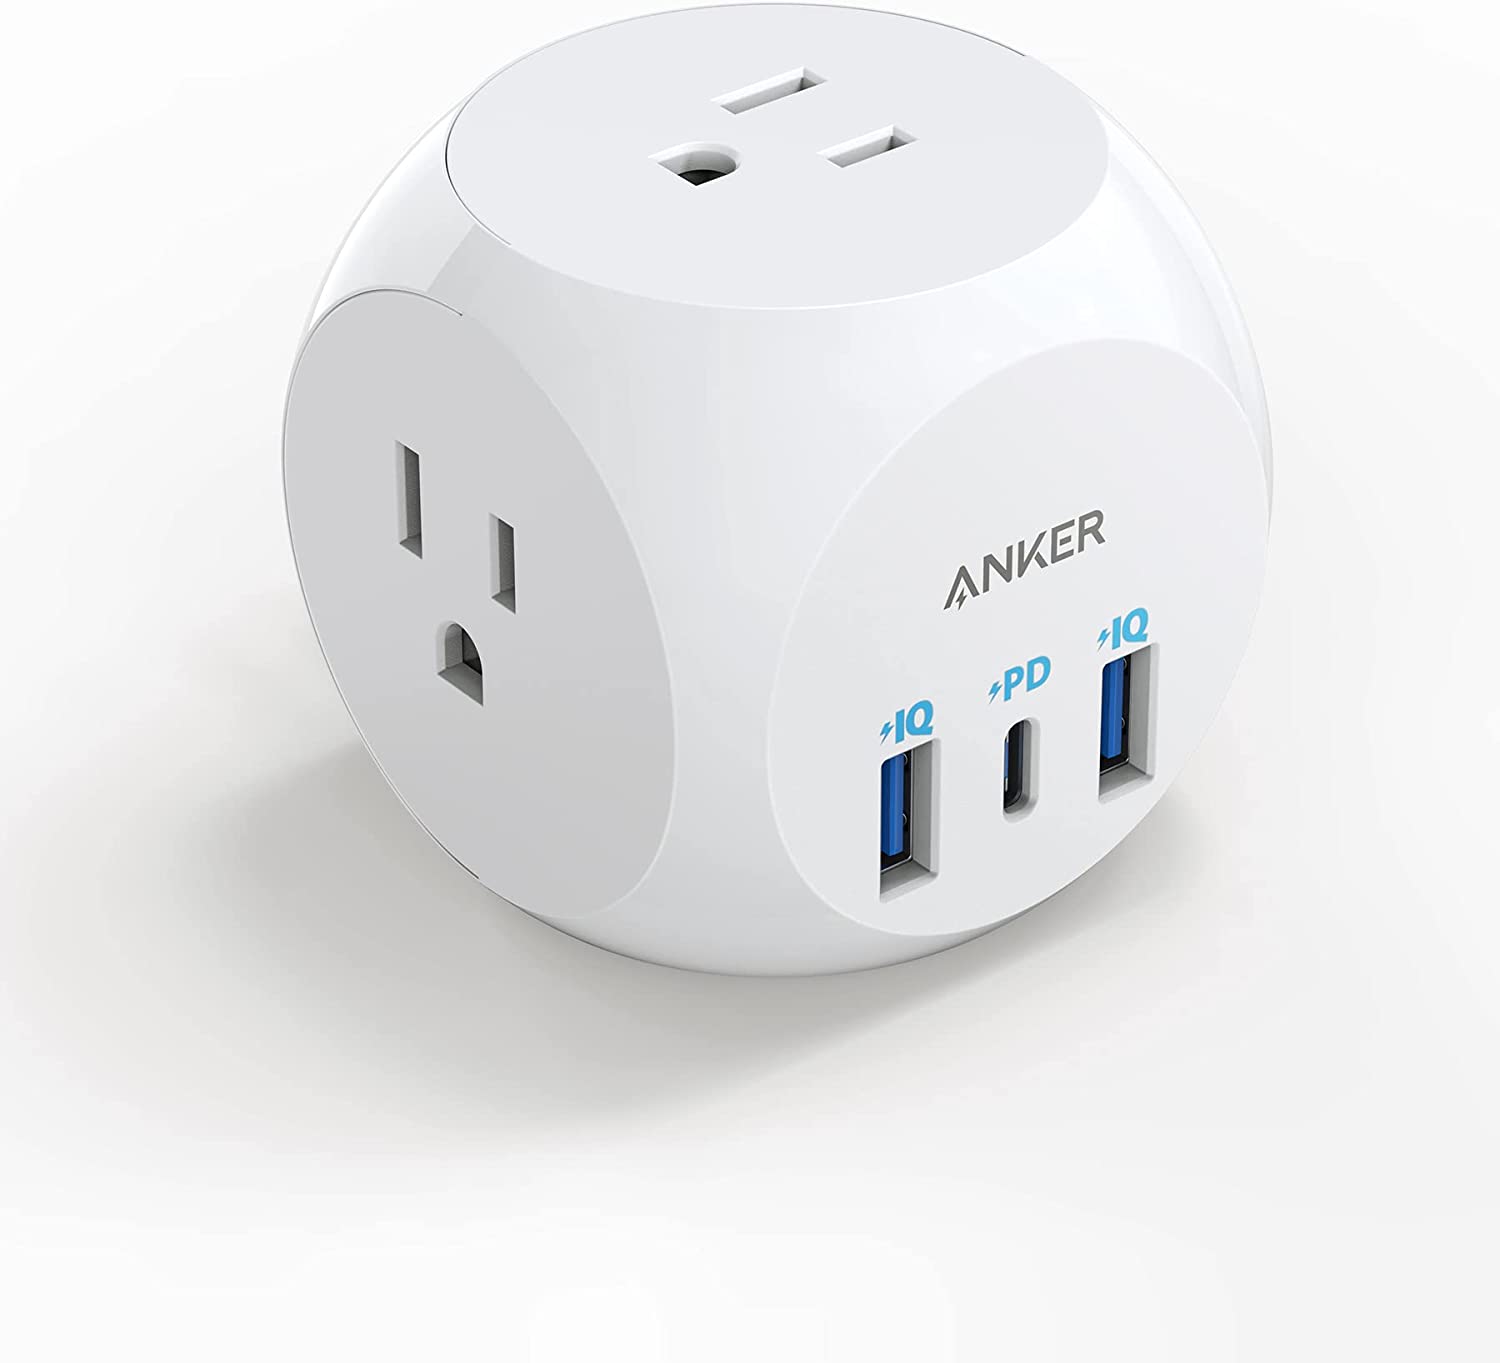 Anker 30W Multi Plug 3-Port AC / USB Outlet Extender w/ USB C $16 + Free Shipping w/ Prime or Orders $25+